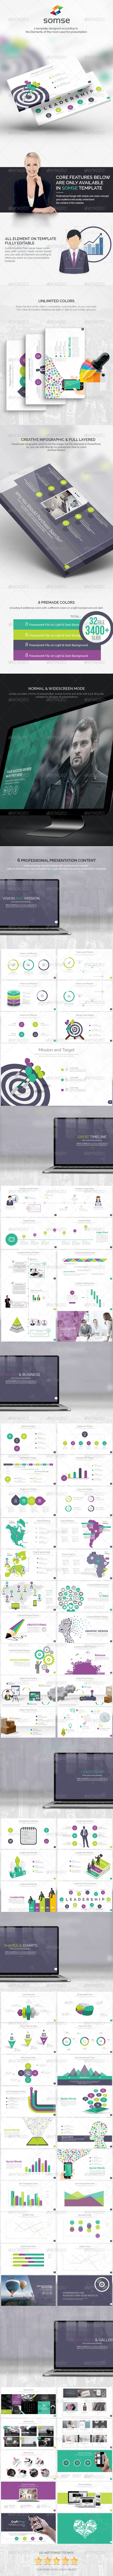 Somse - All in One Powerpoint Template